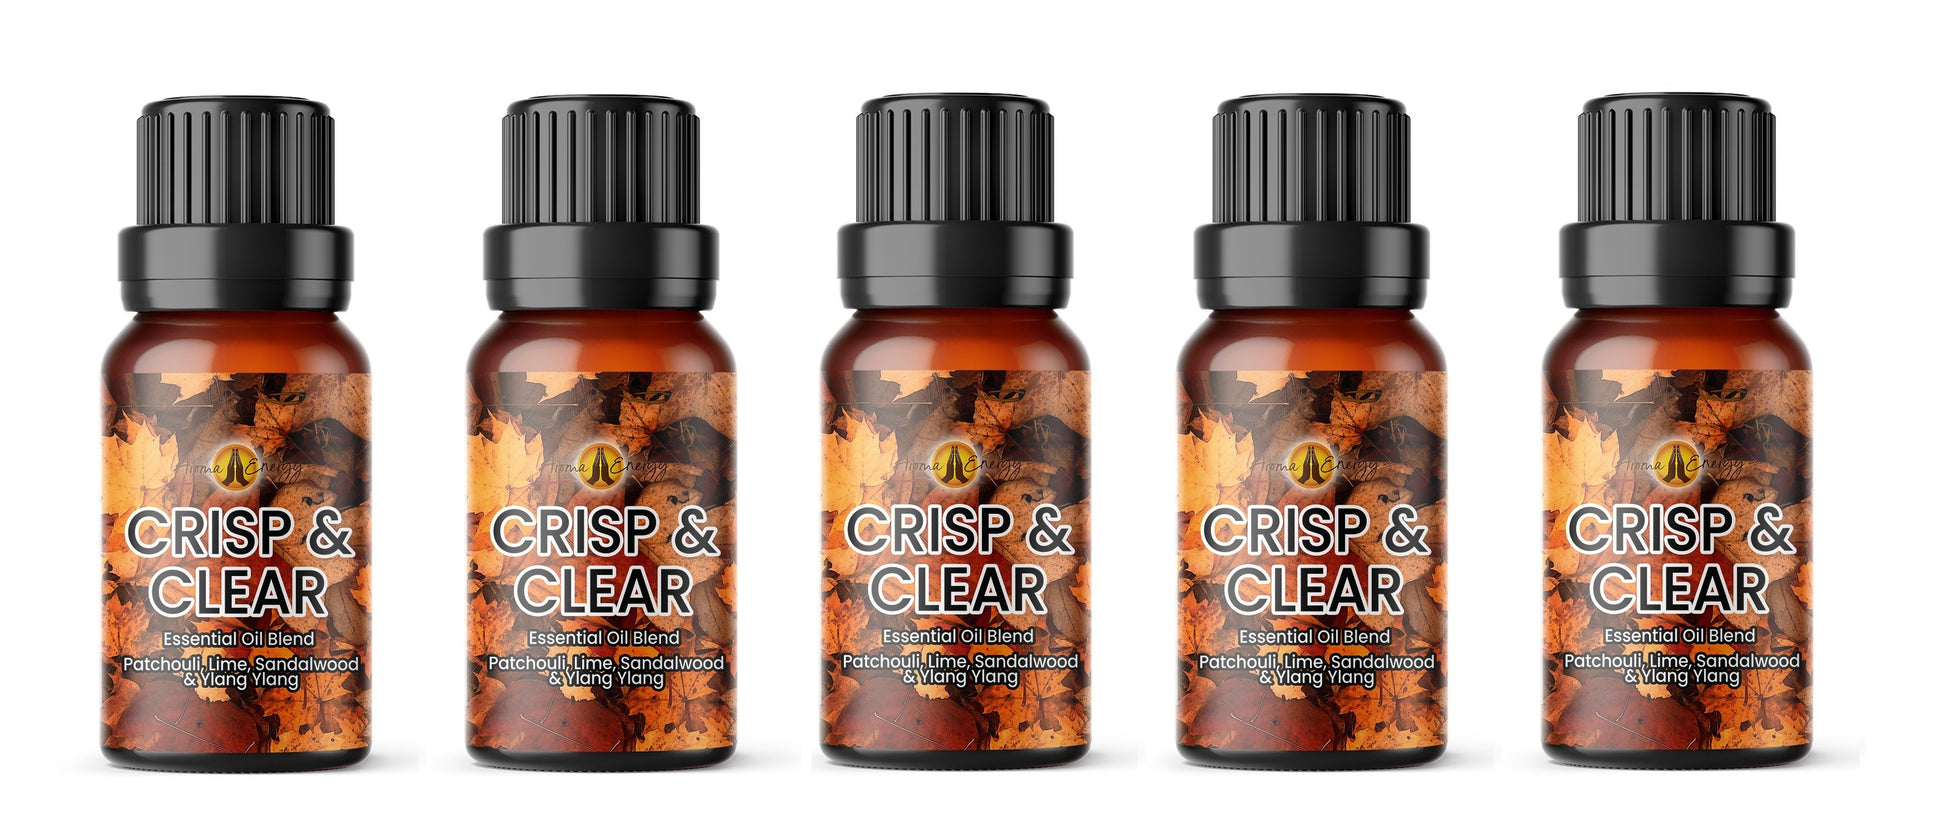 Crisp & Clear Pure Essential Oil Blend - Aroma Energy